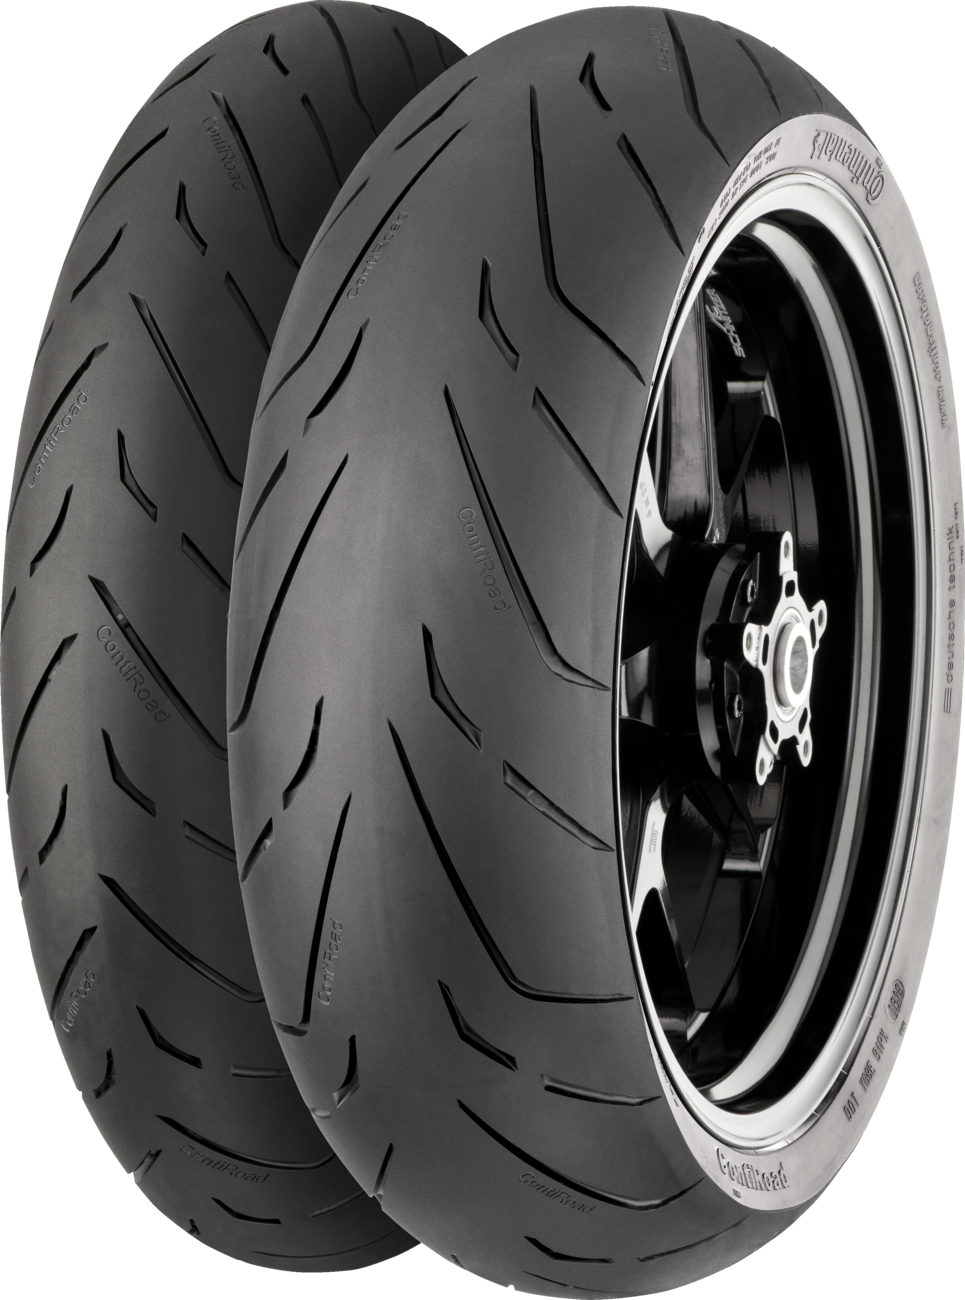 Tire - ContiRoad - Front - 110/70R17 - 54V